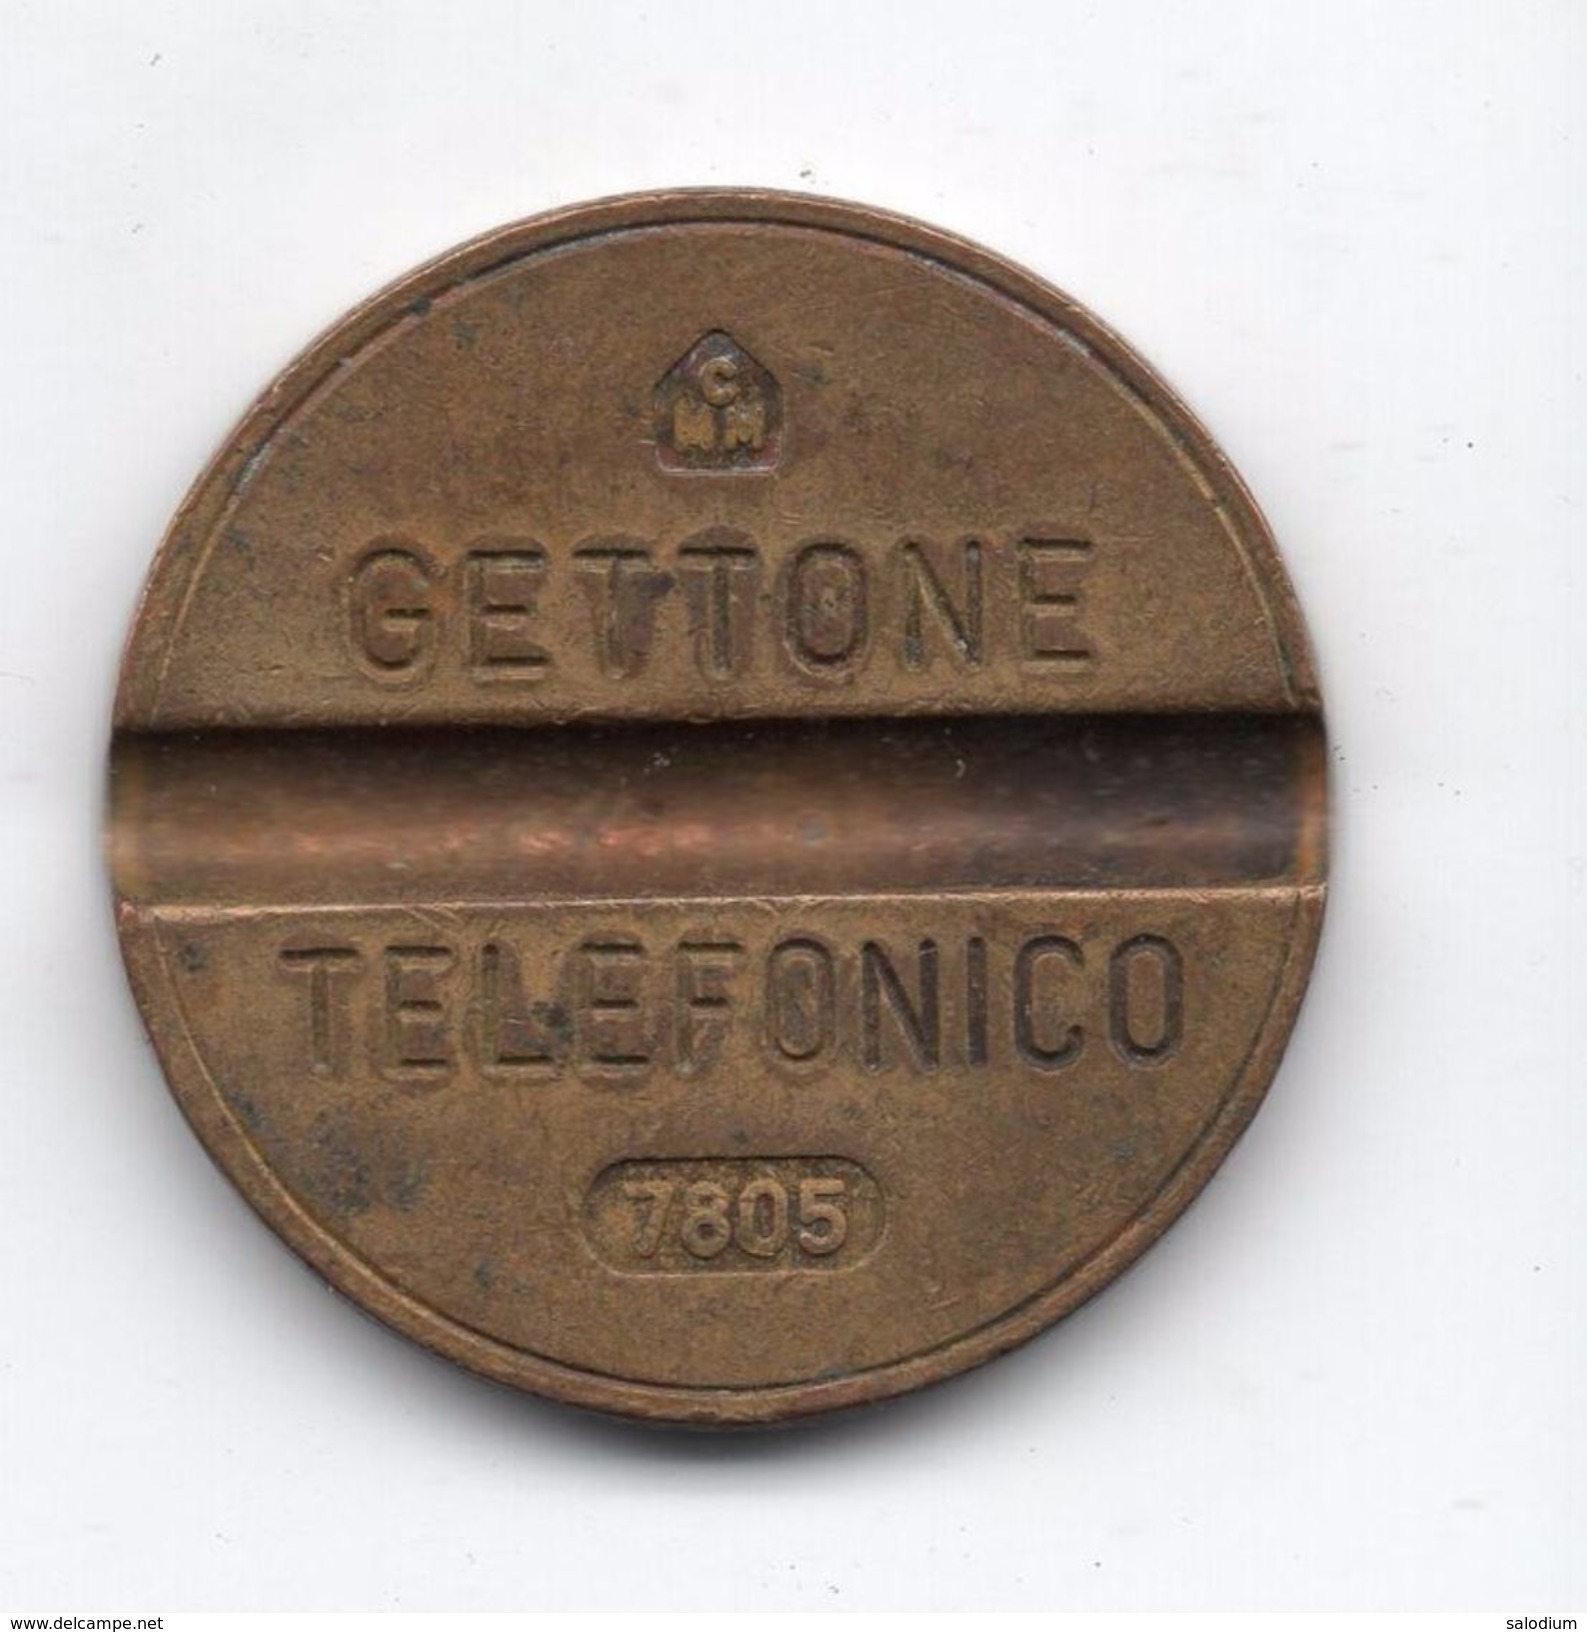 Gettone Telefonico 7805  Token Telephone - (Id-850) - Professionals/Firms